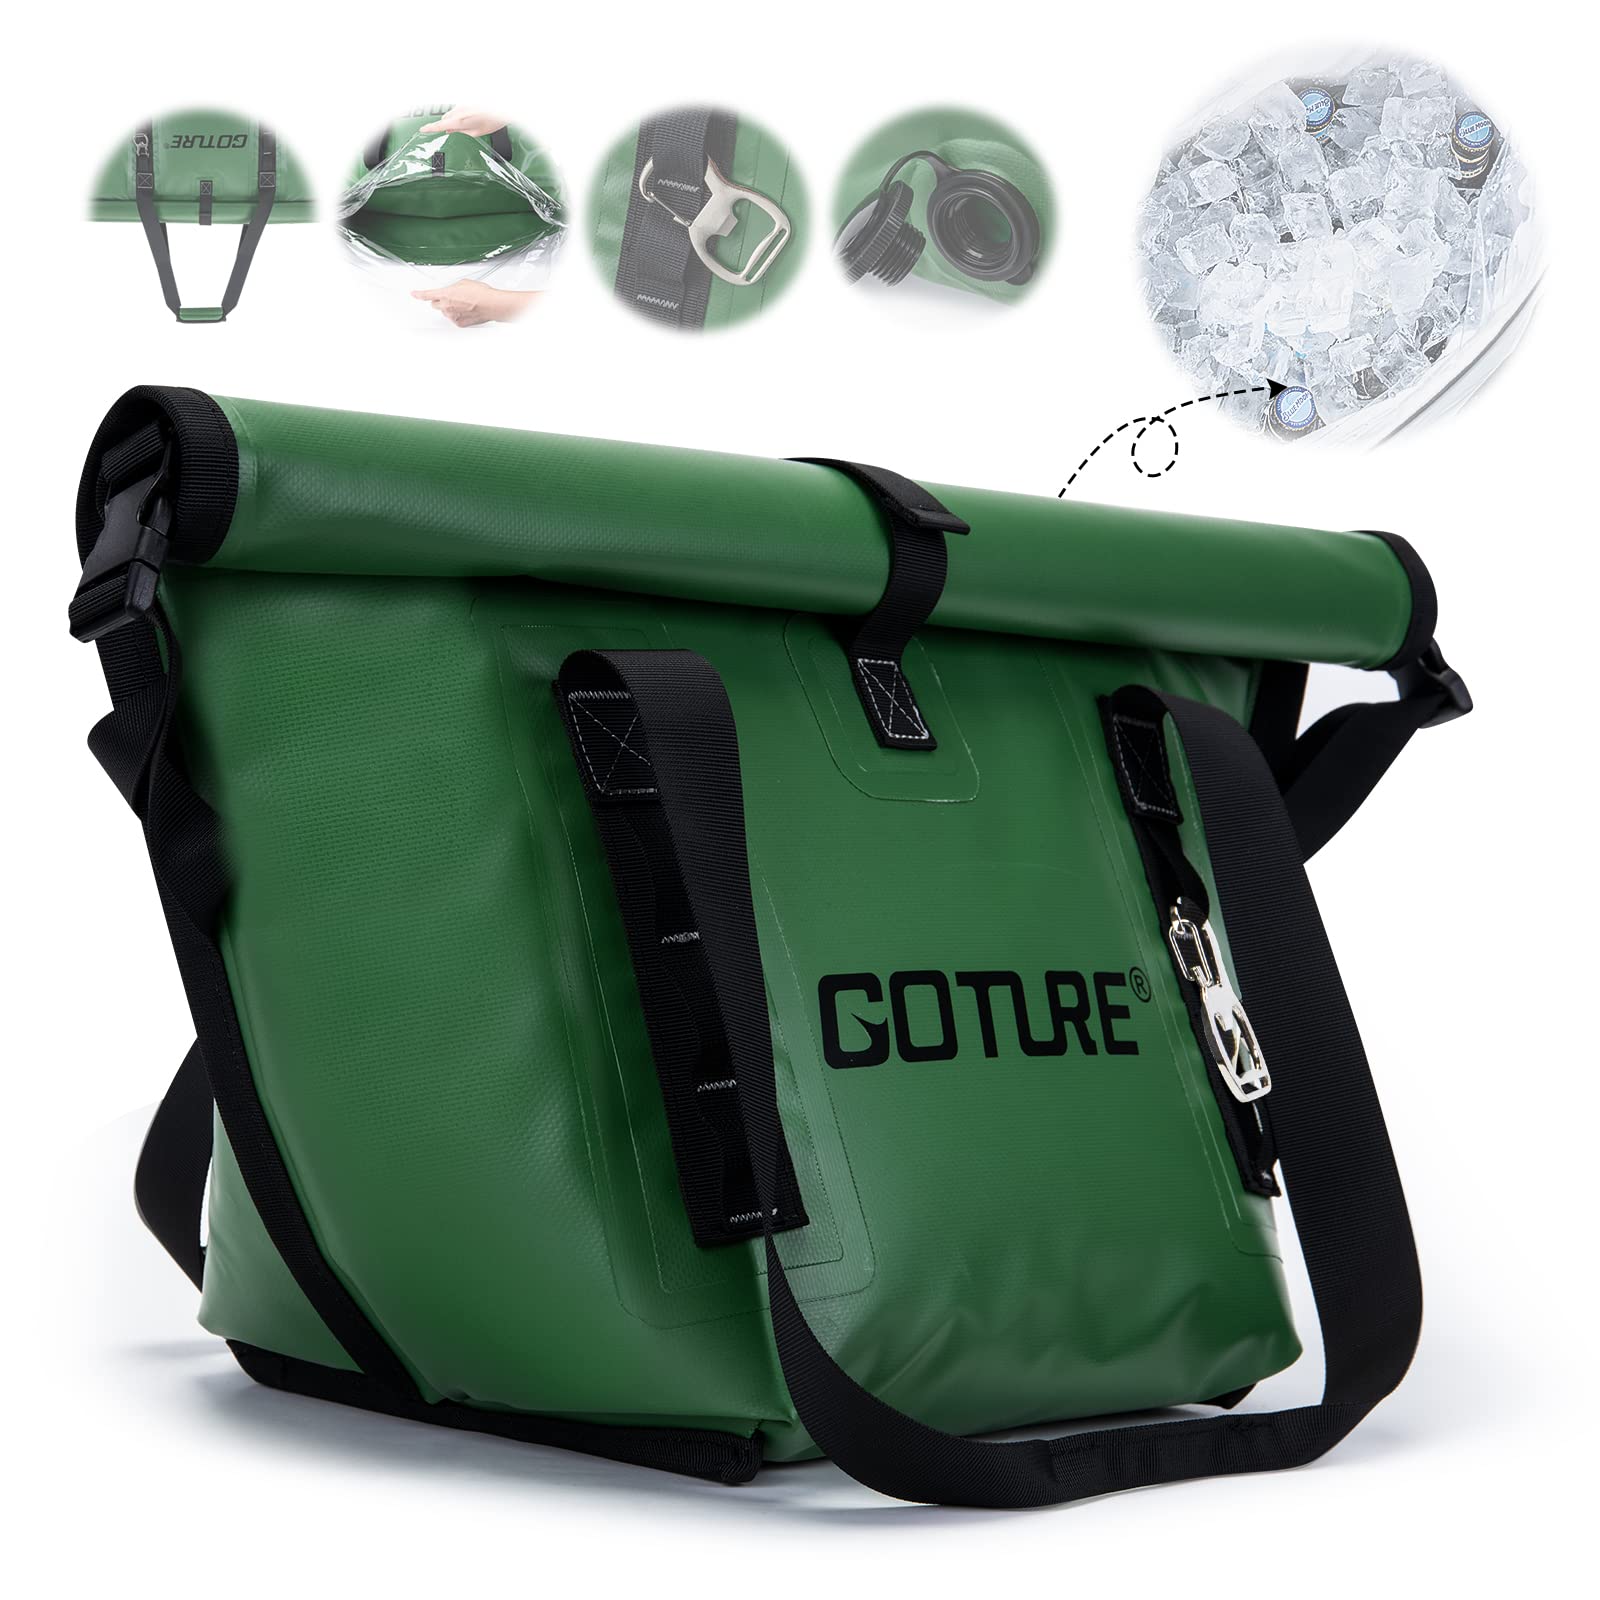 Goture Cooler Bag Soft Coolers Insulated Leak Proof Portable 24 Can Soft Sided Cooler BagKeeping Ice Cold for DaysTravel